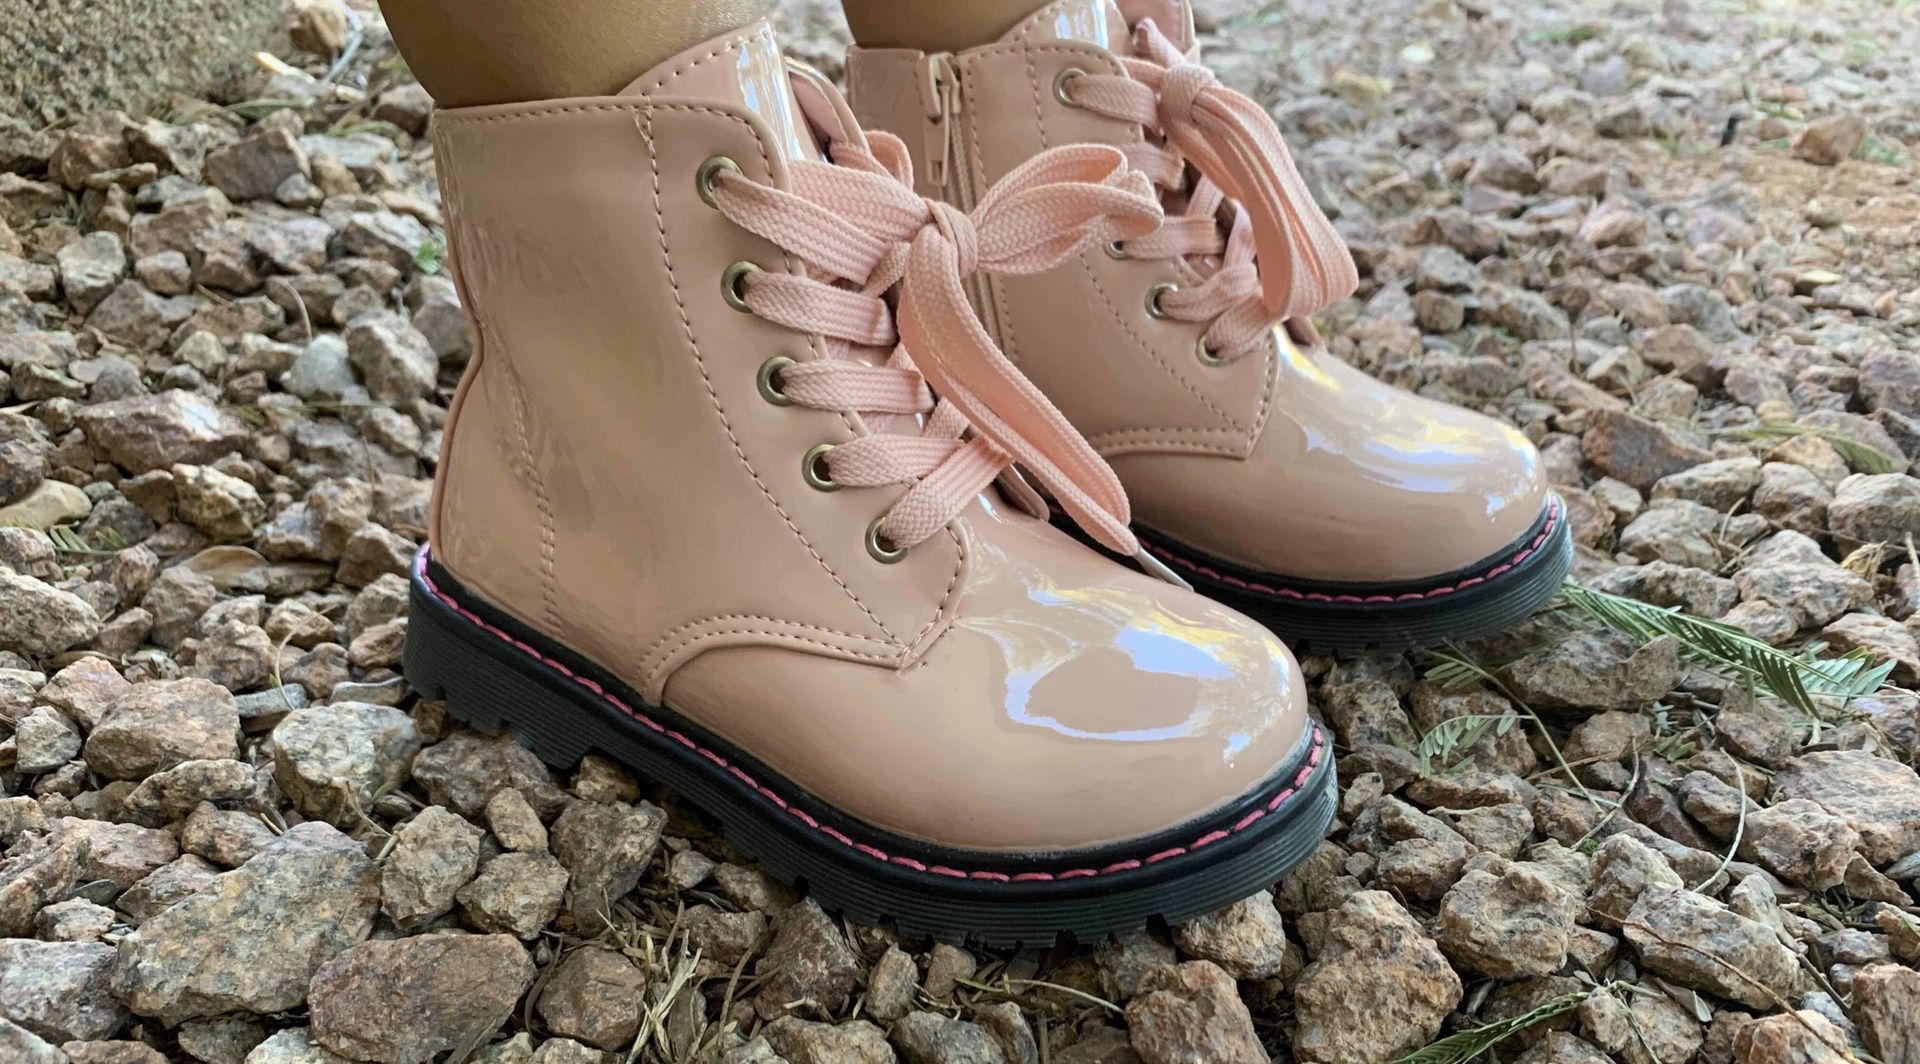 New pink girl boots